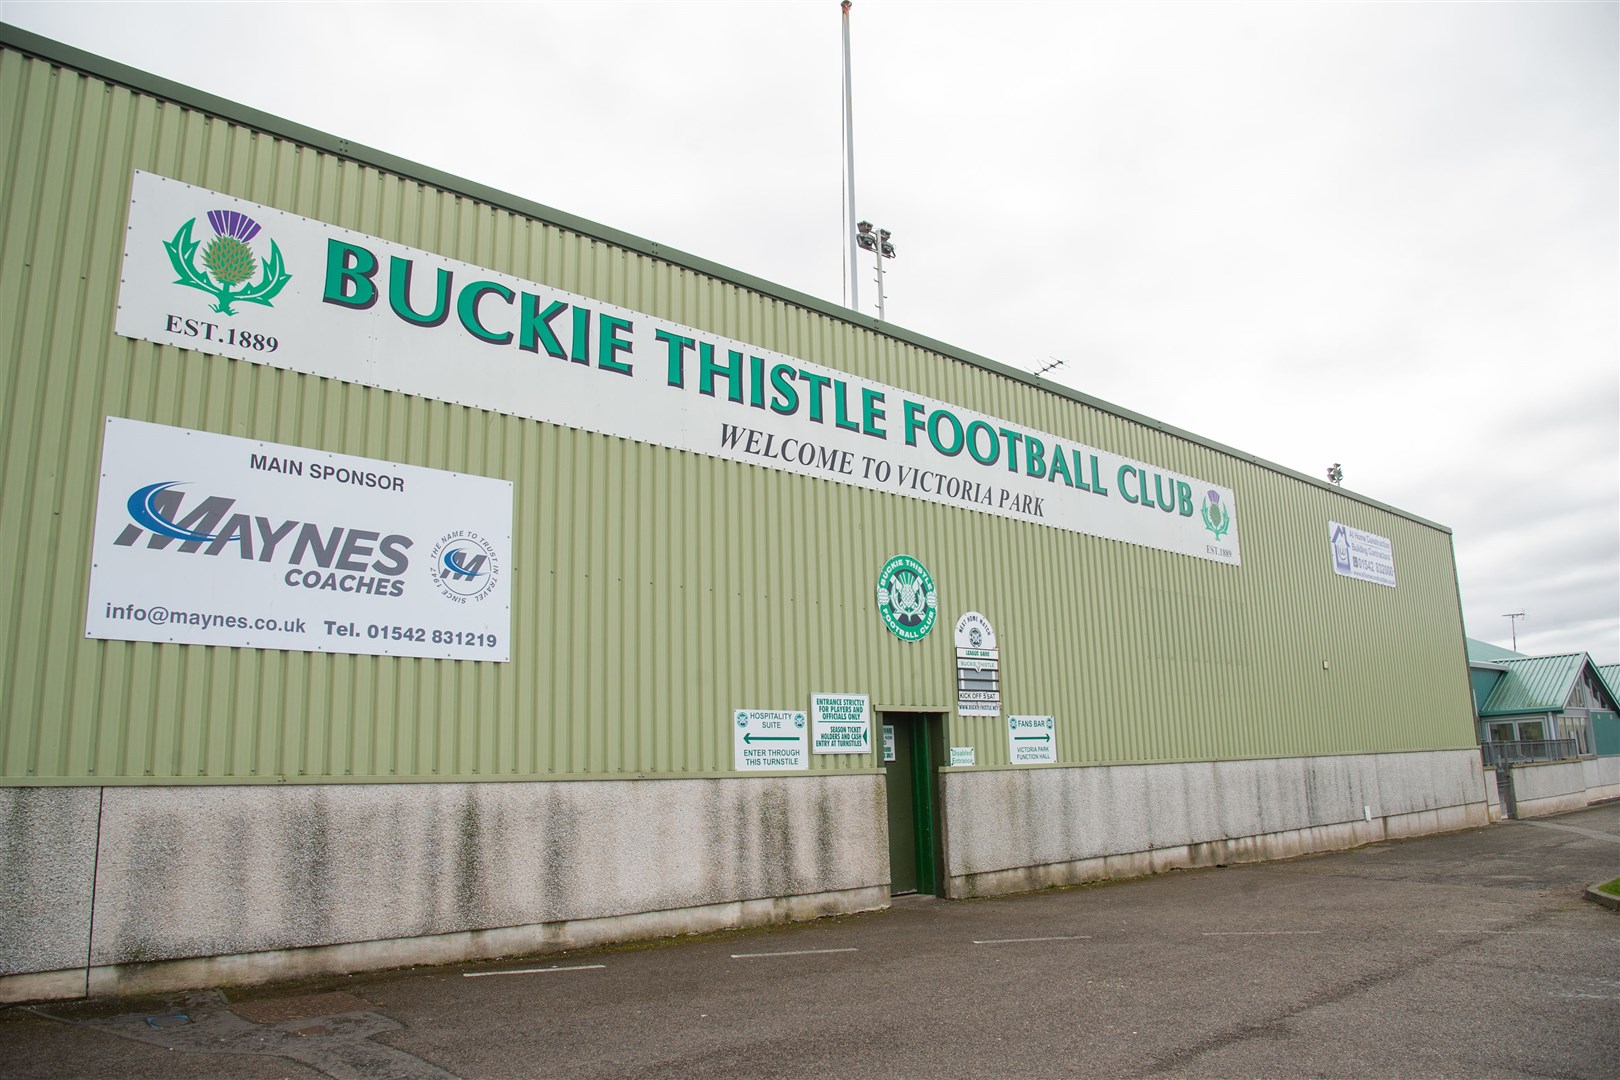 Victoria Park, home of Buckie Thistle, will see football action again soon.